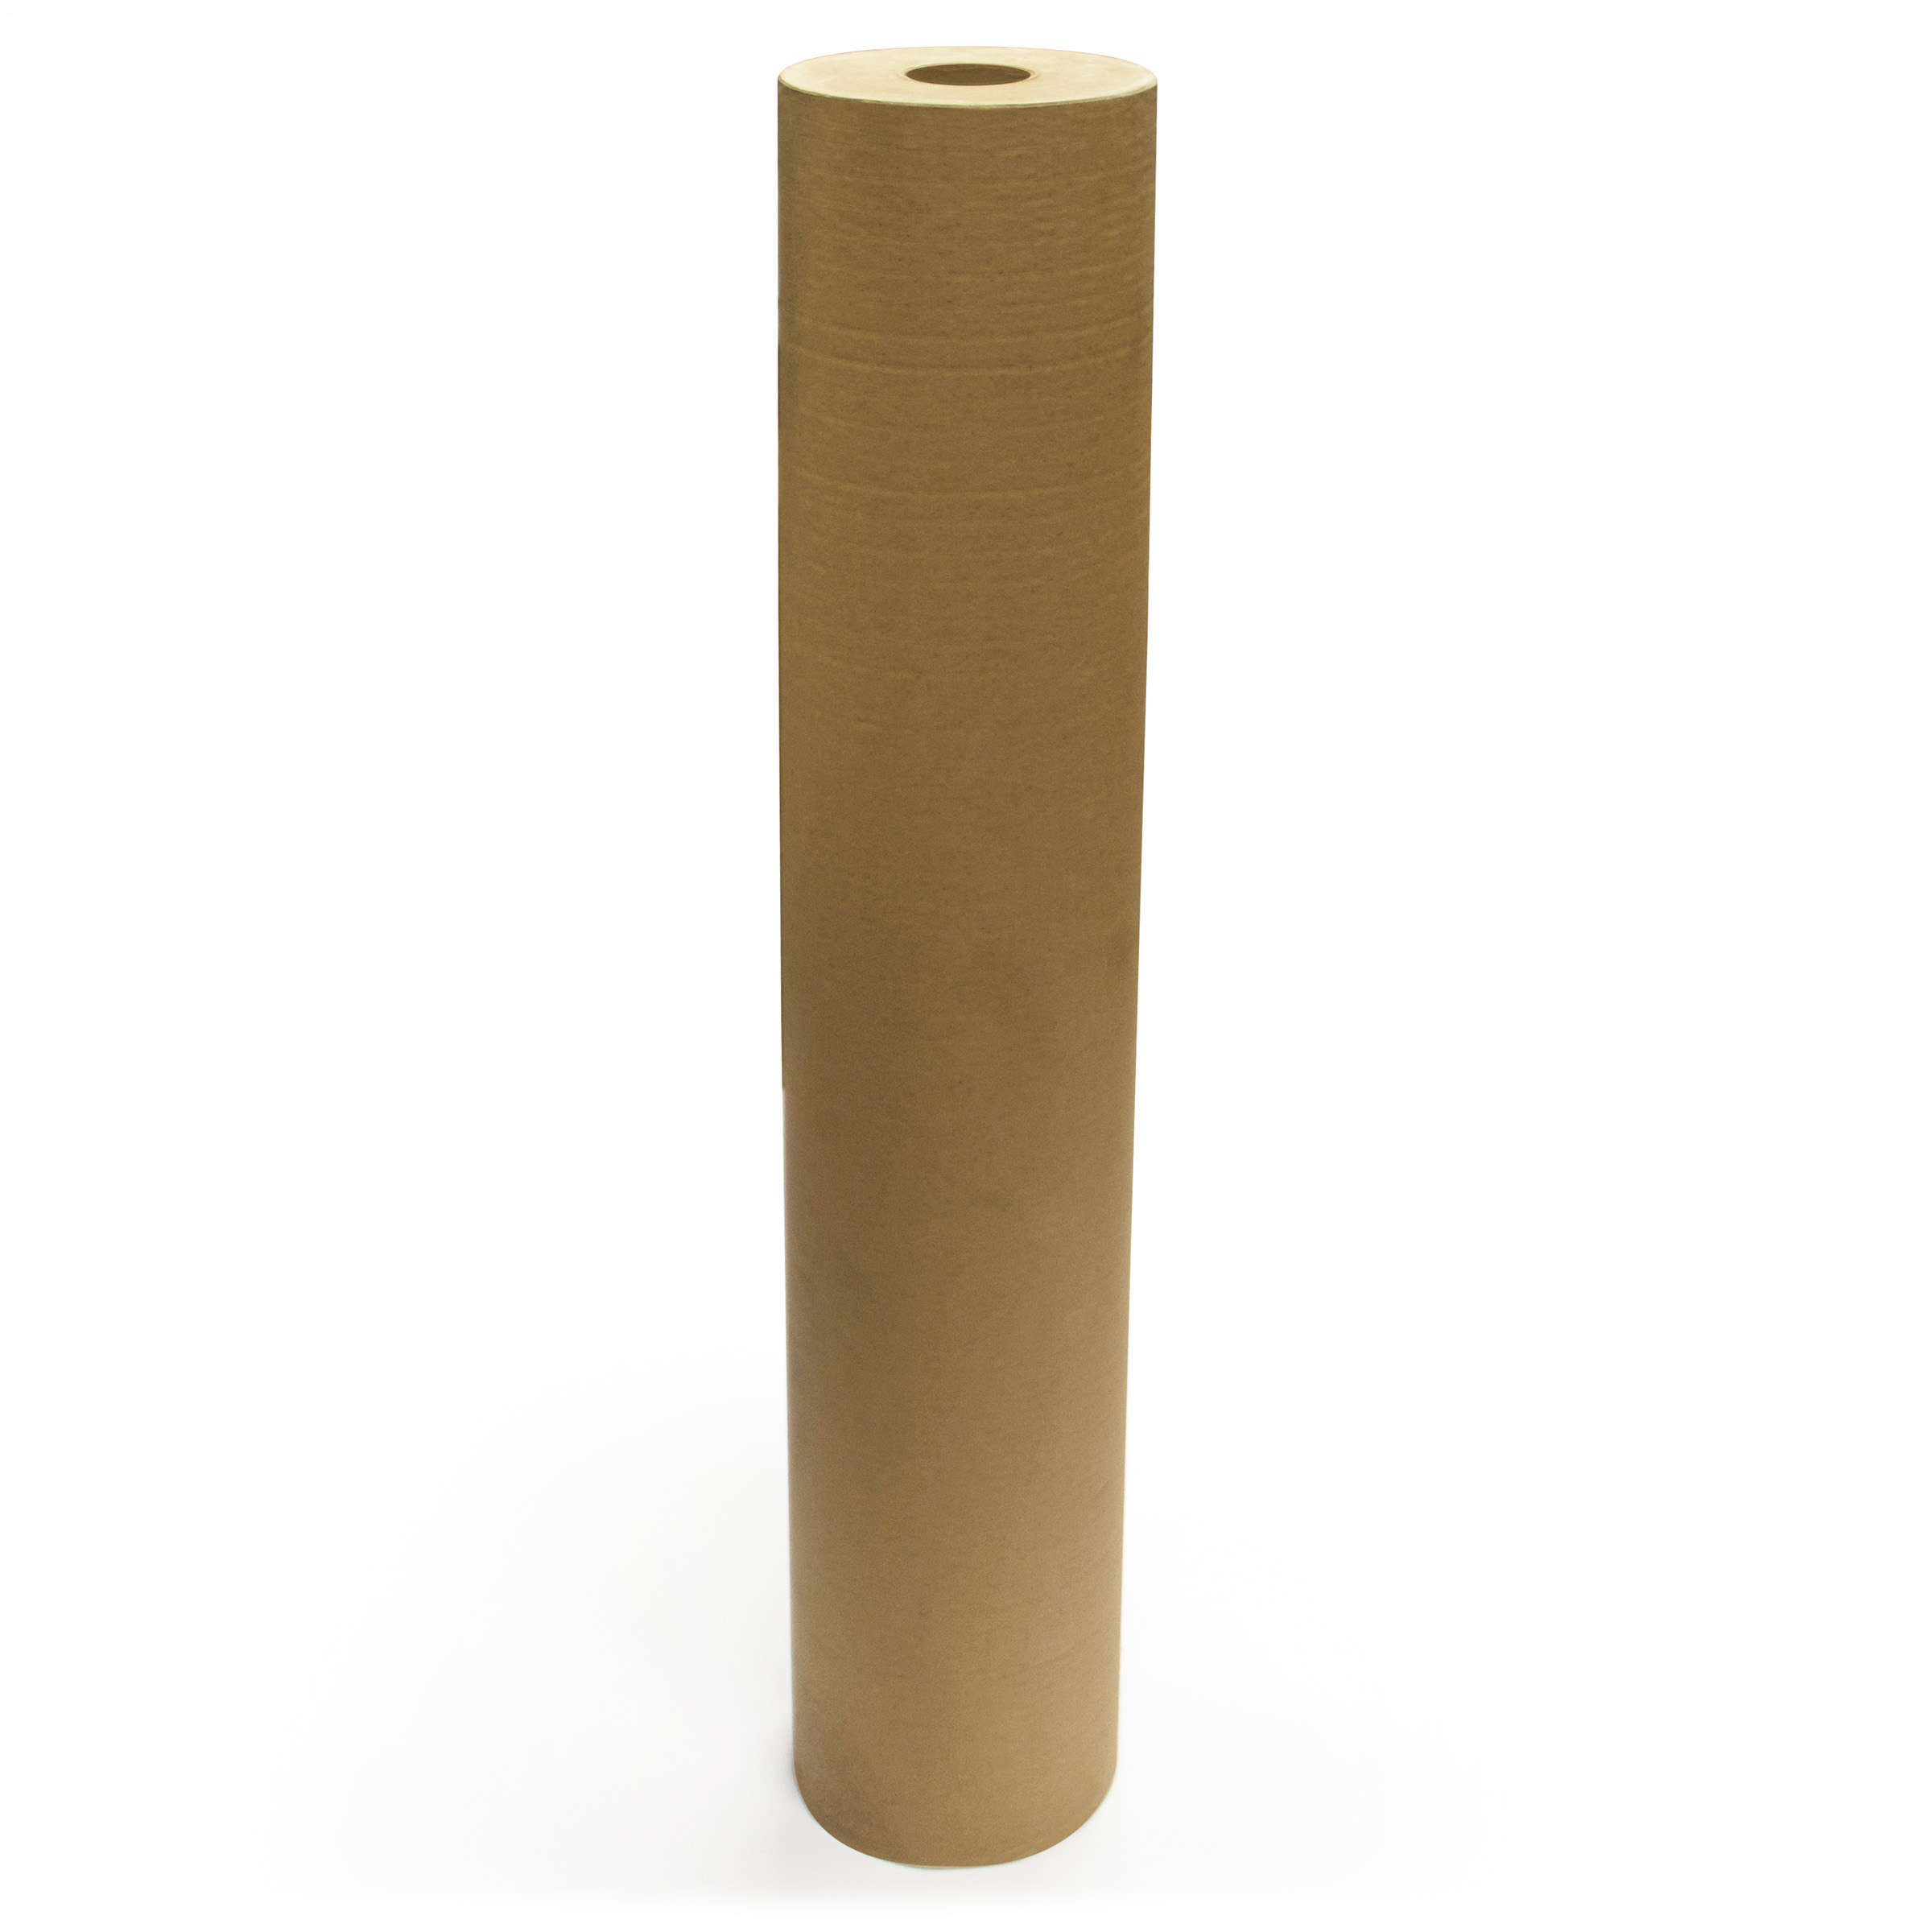 Brown Masking Paper: Versatile and Reliable Protection